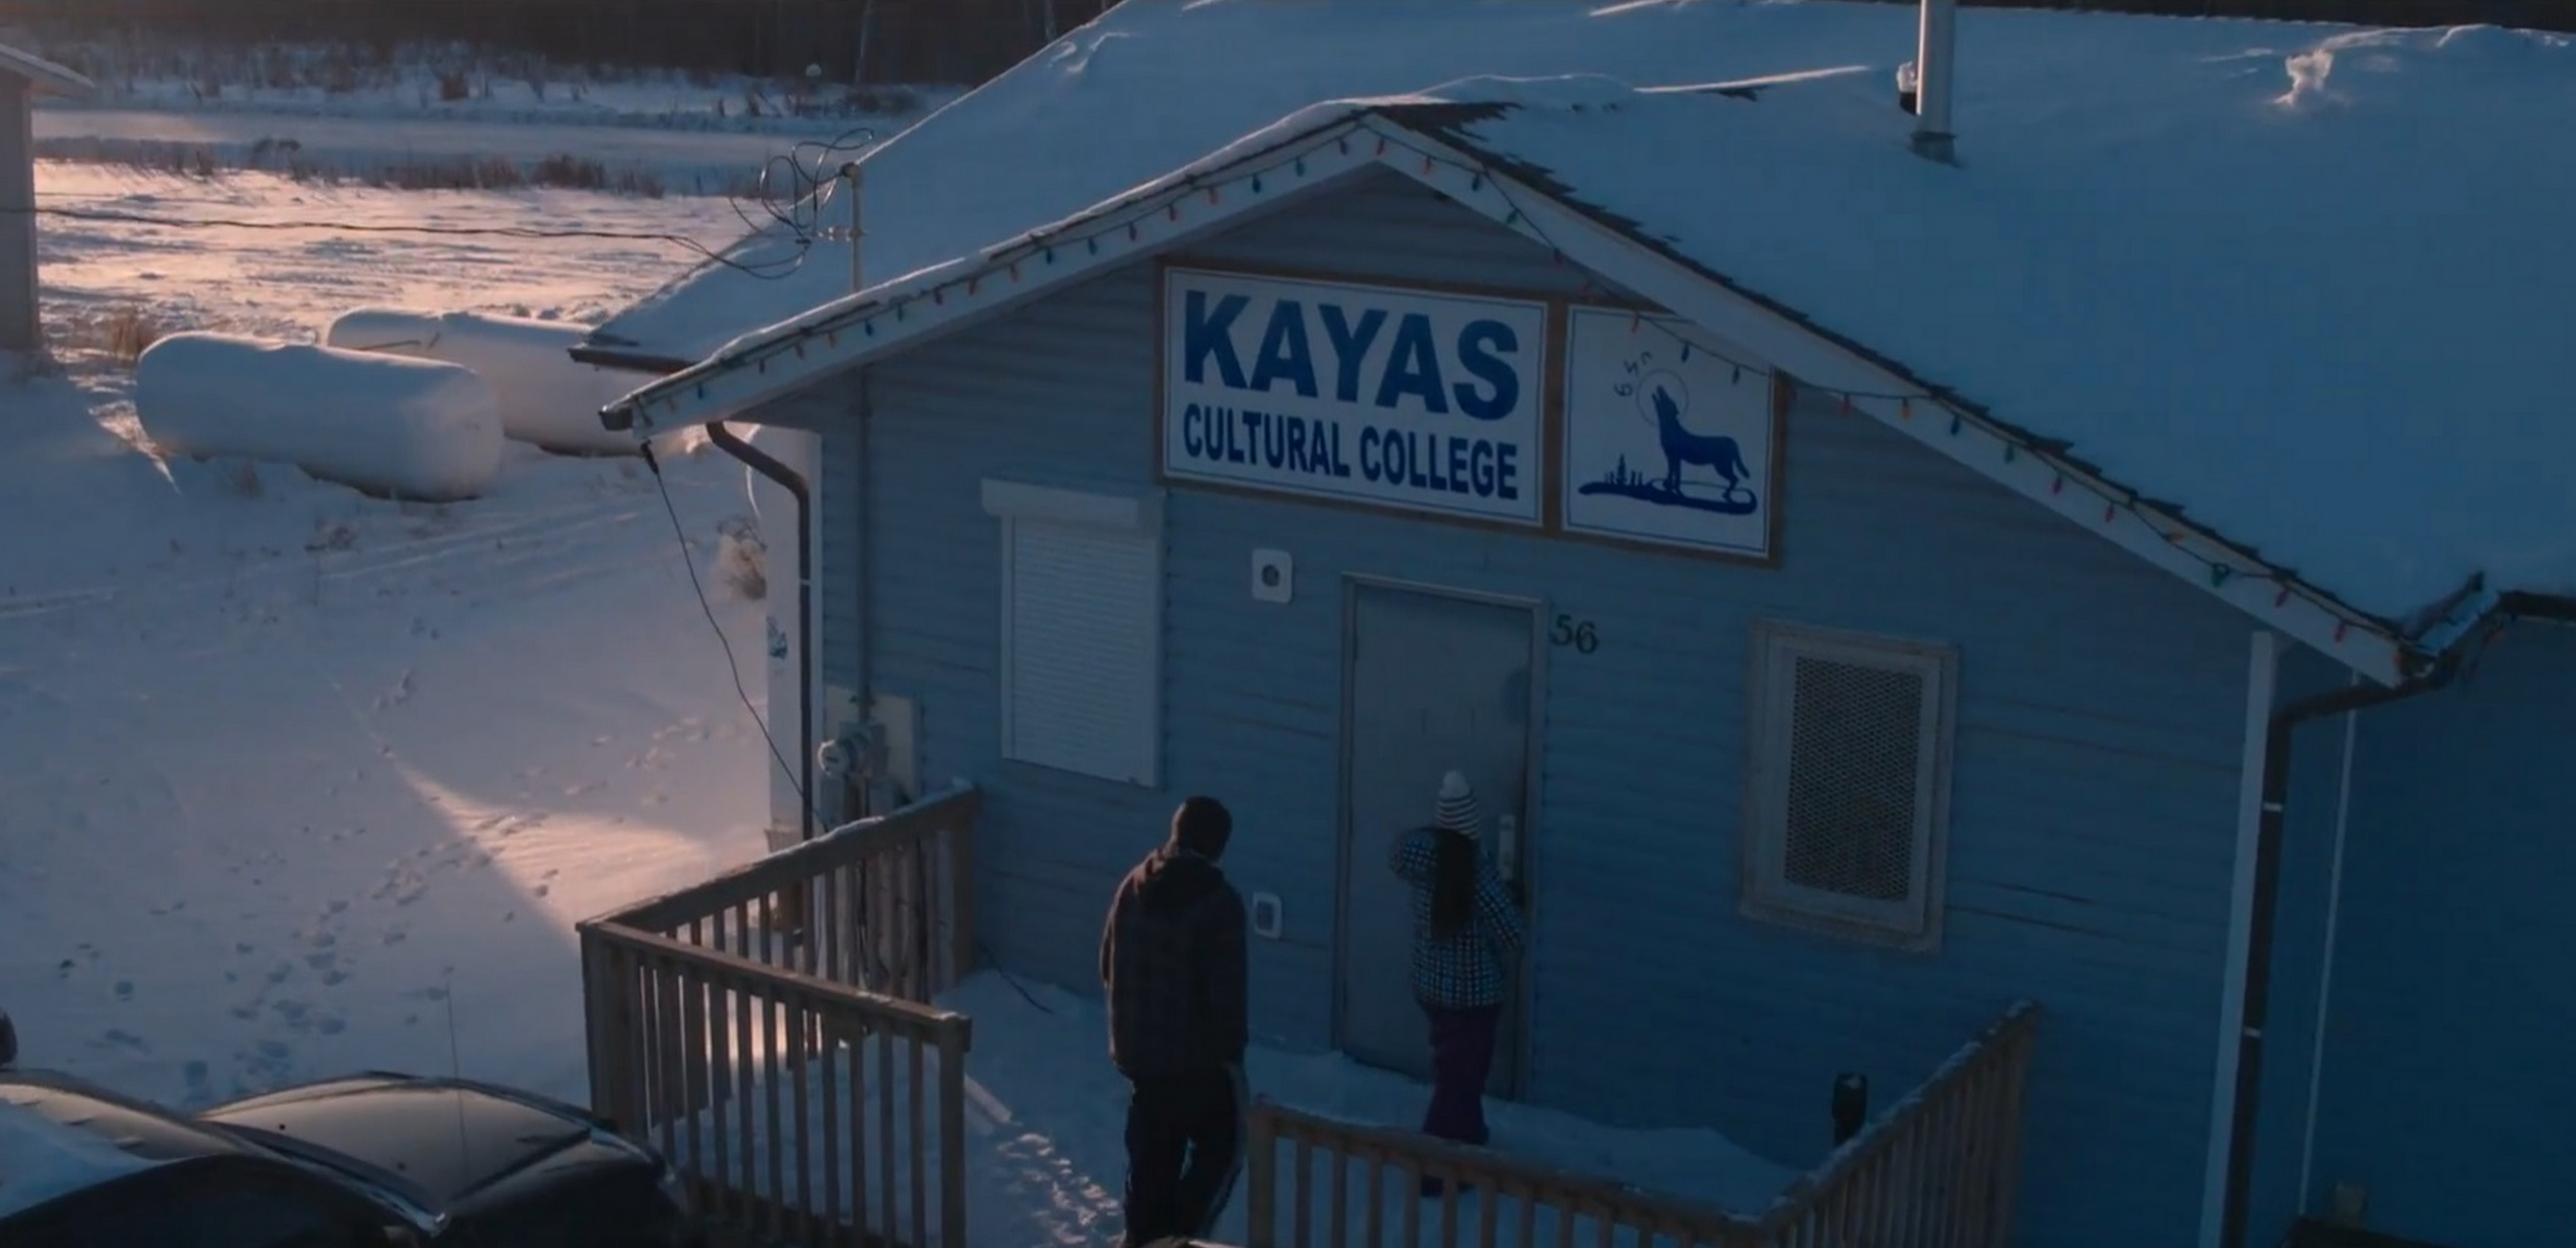 Outside of Kayas College, which is covered in snow